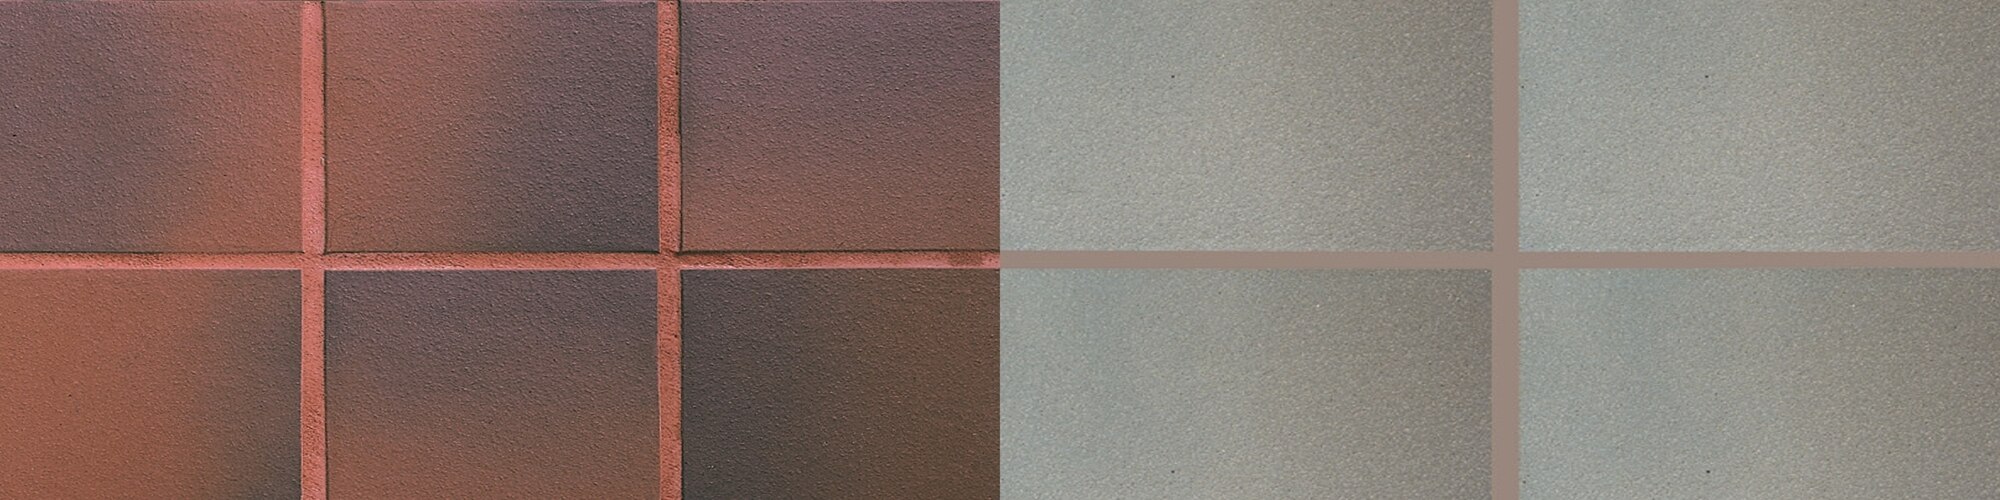 DAL_Quarry-Textures_swatch2_41_banner